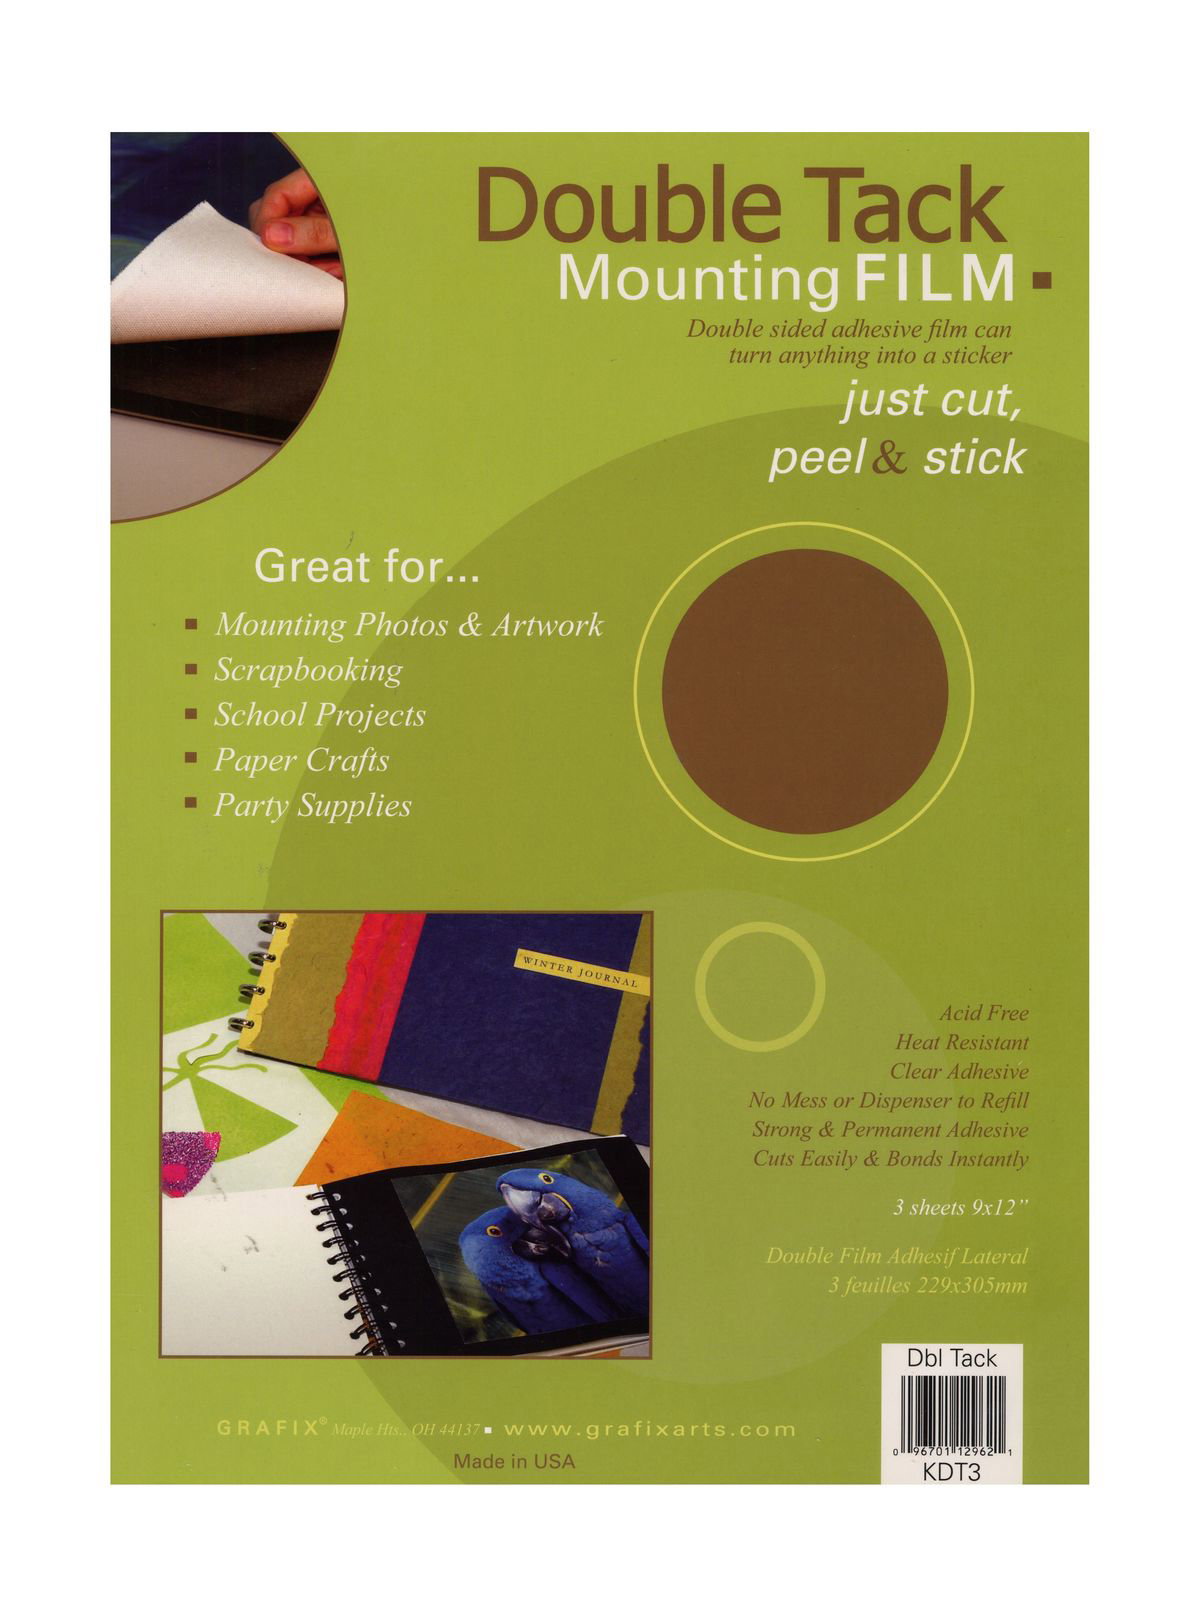 X-film double sided adhesive sheet